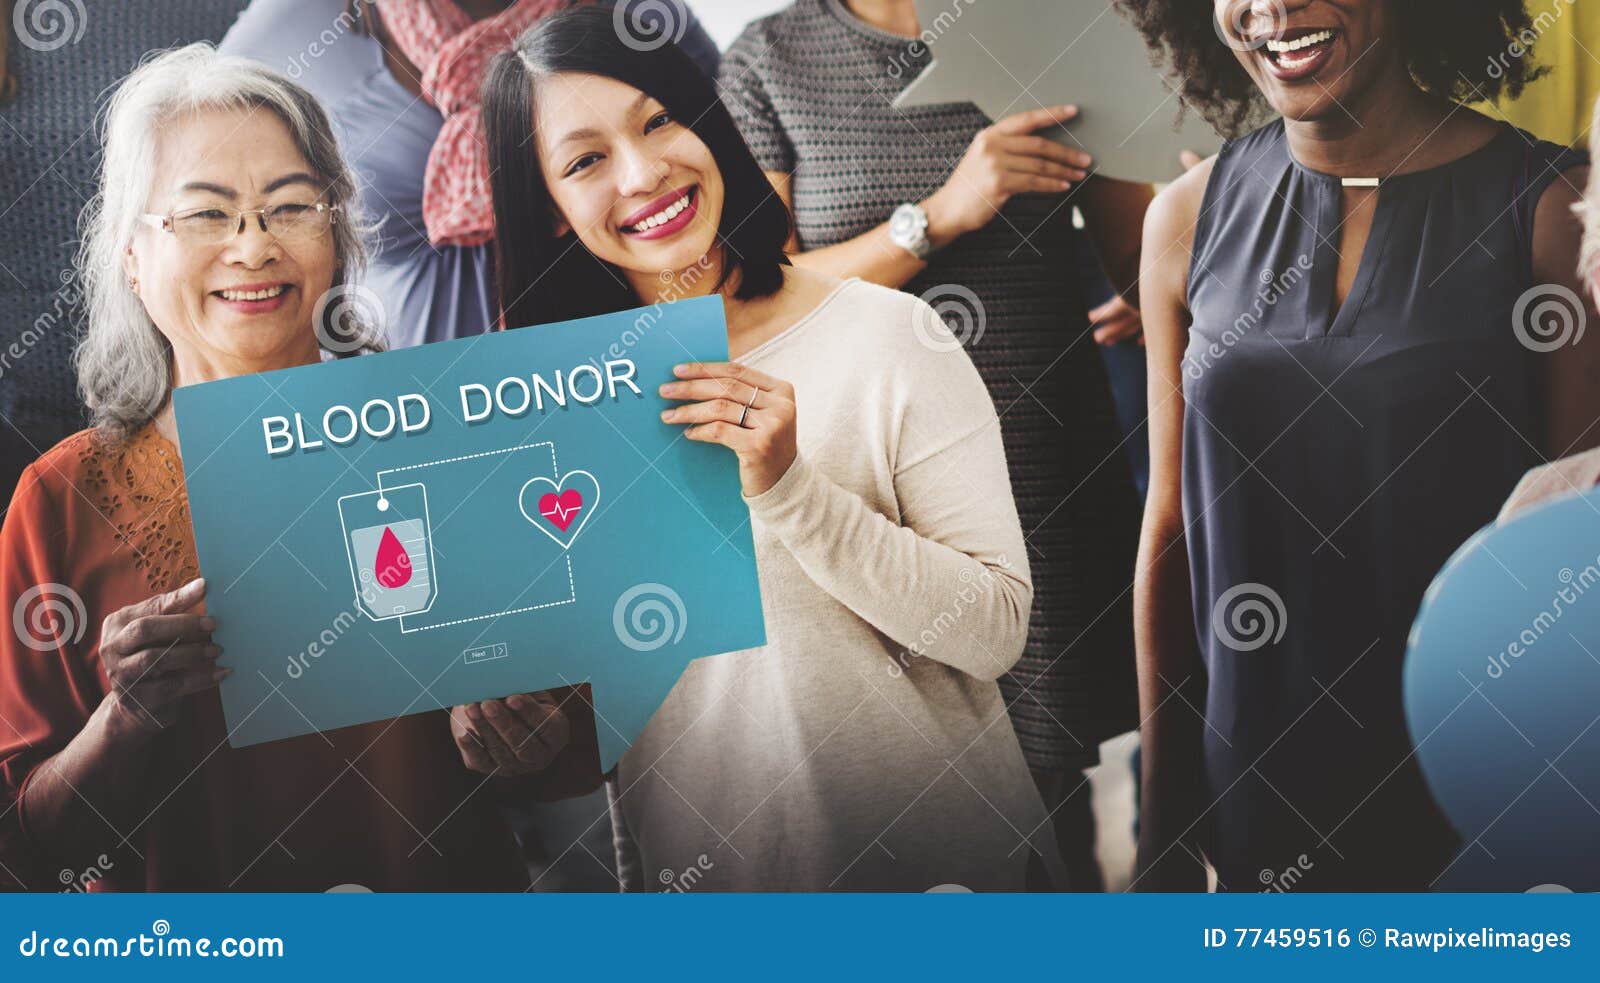 blood donation give life transfusion sangre concept